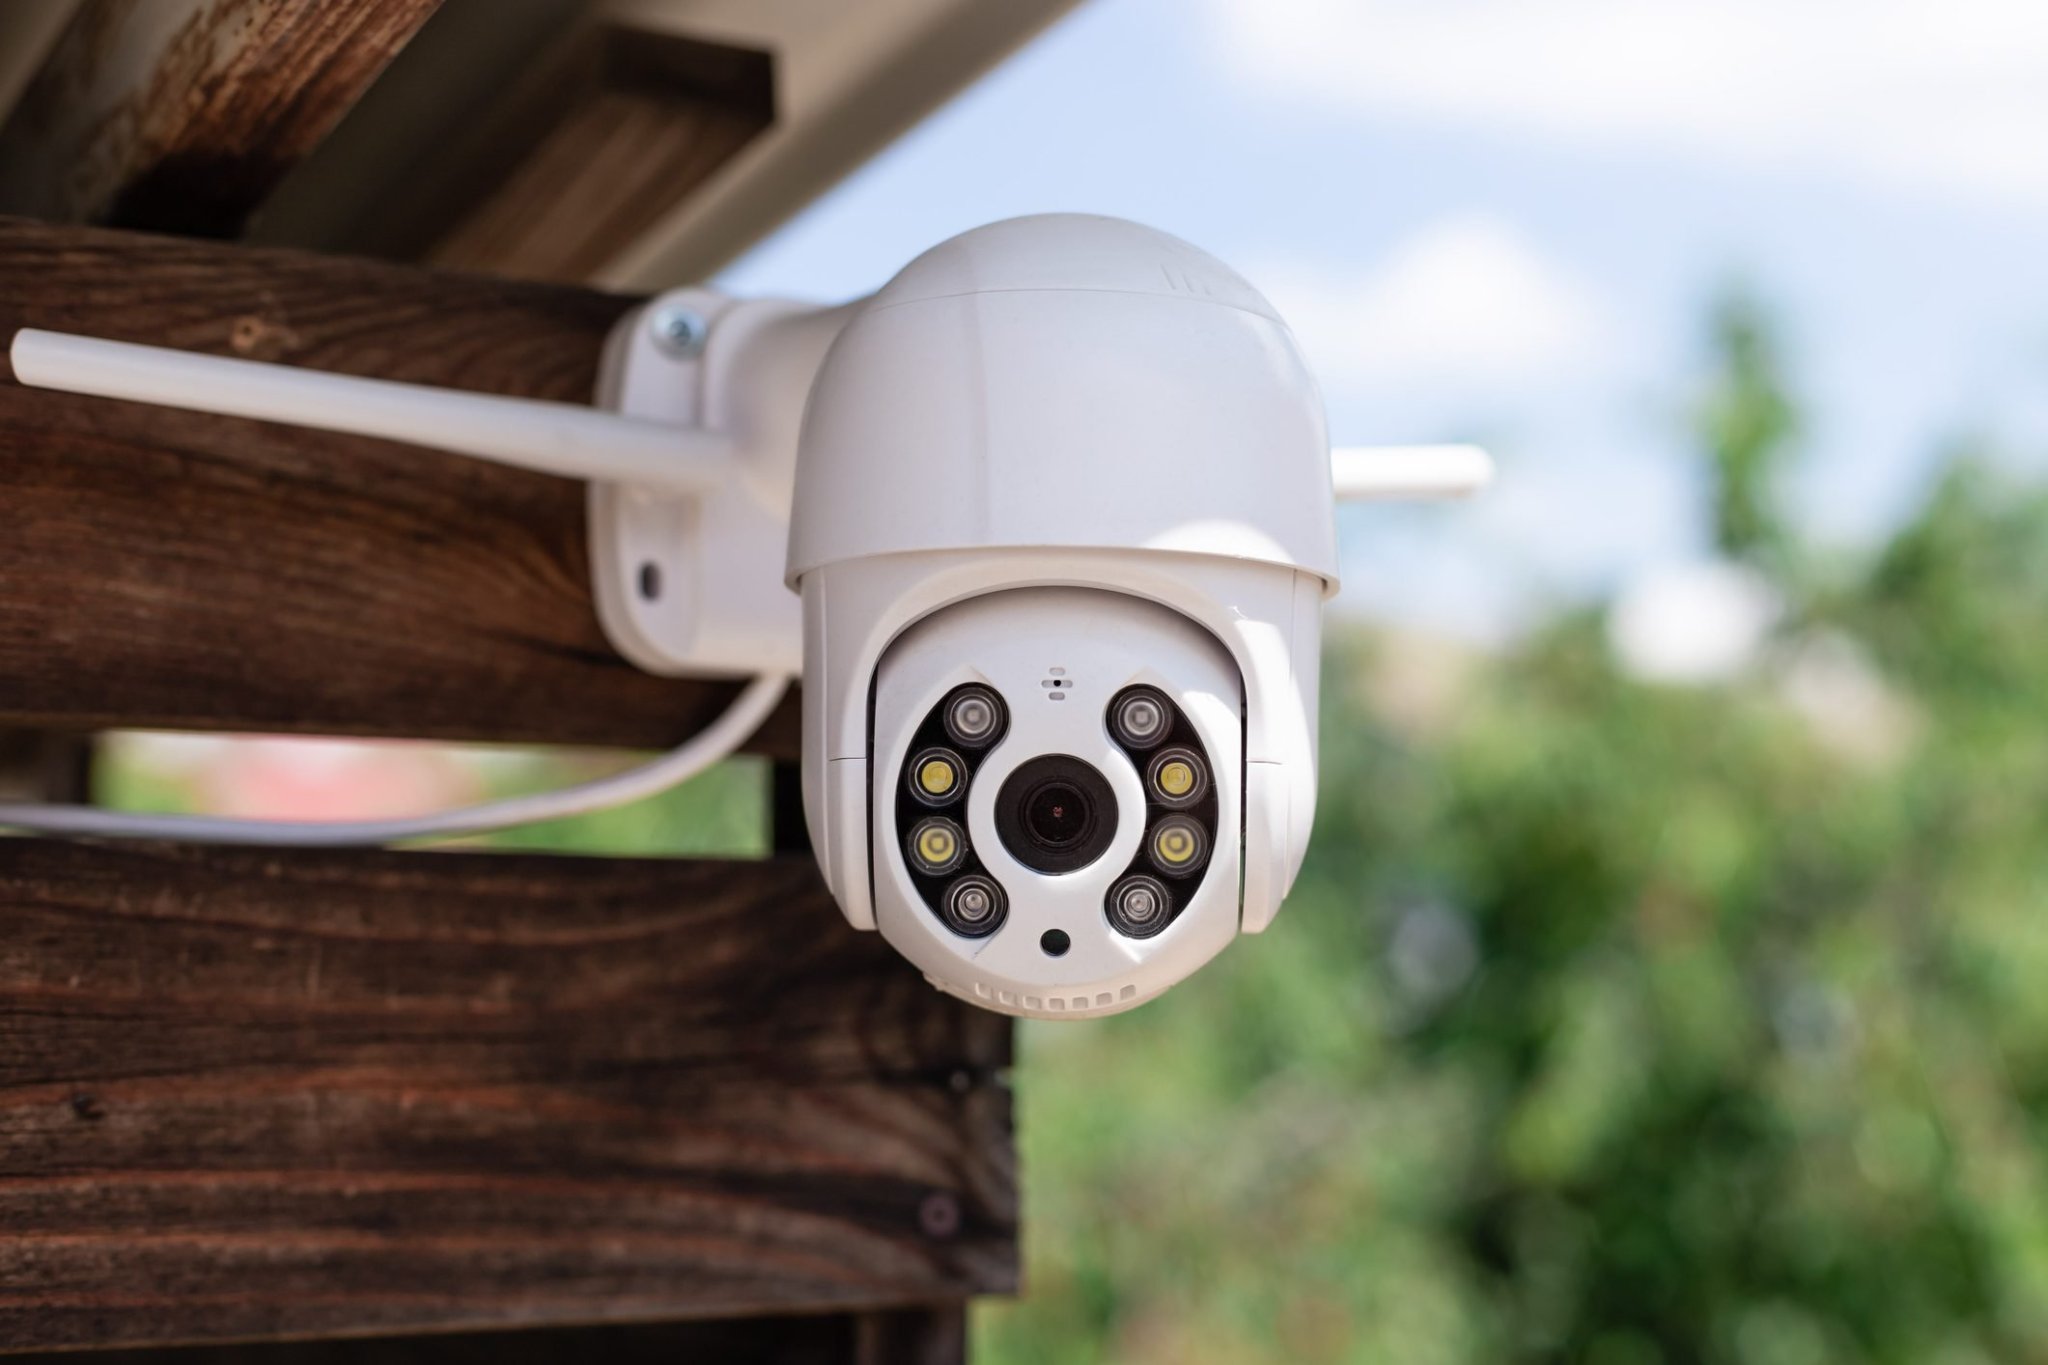 Can My Neighbor Point Their Security Camera at My Backyard?